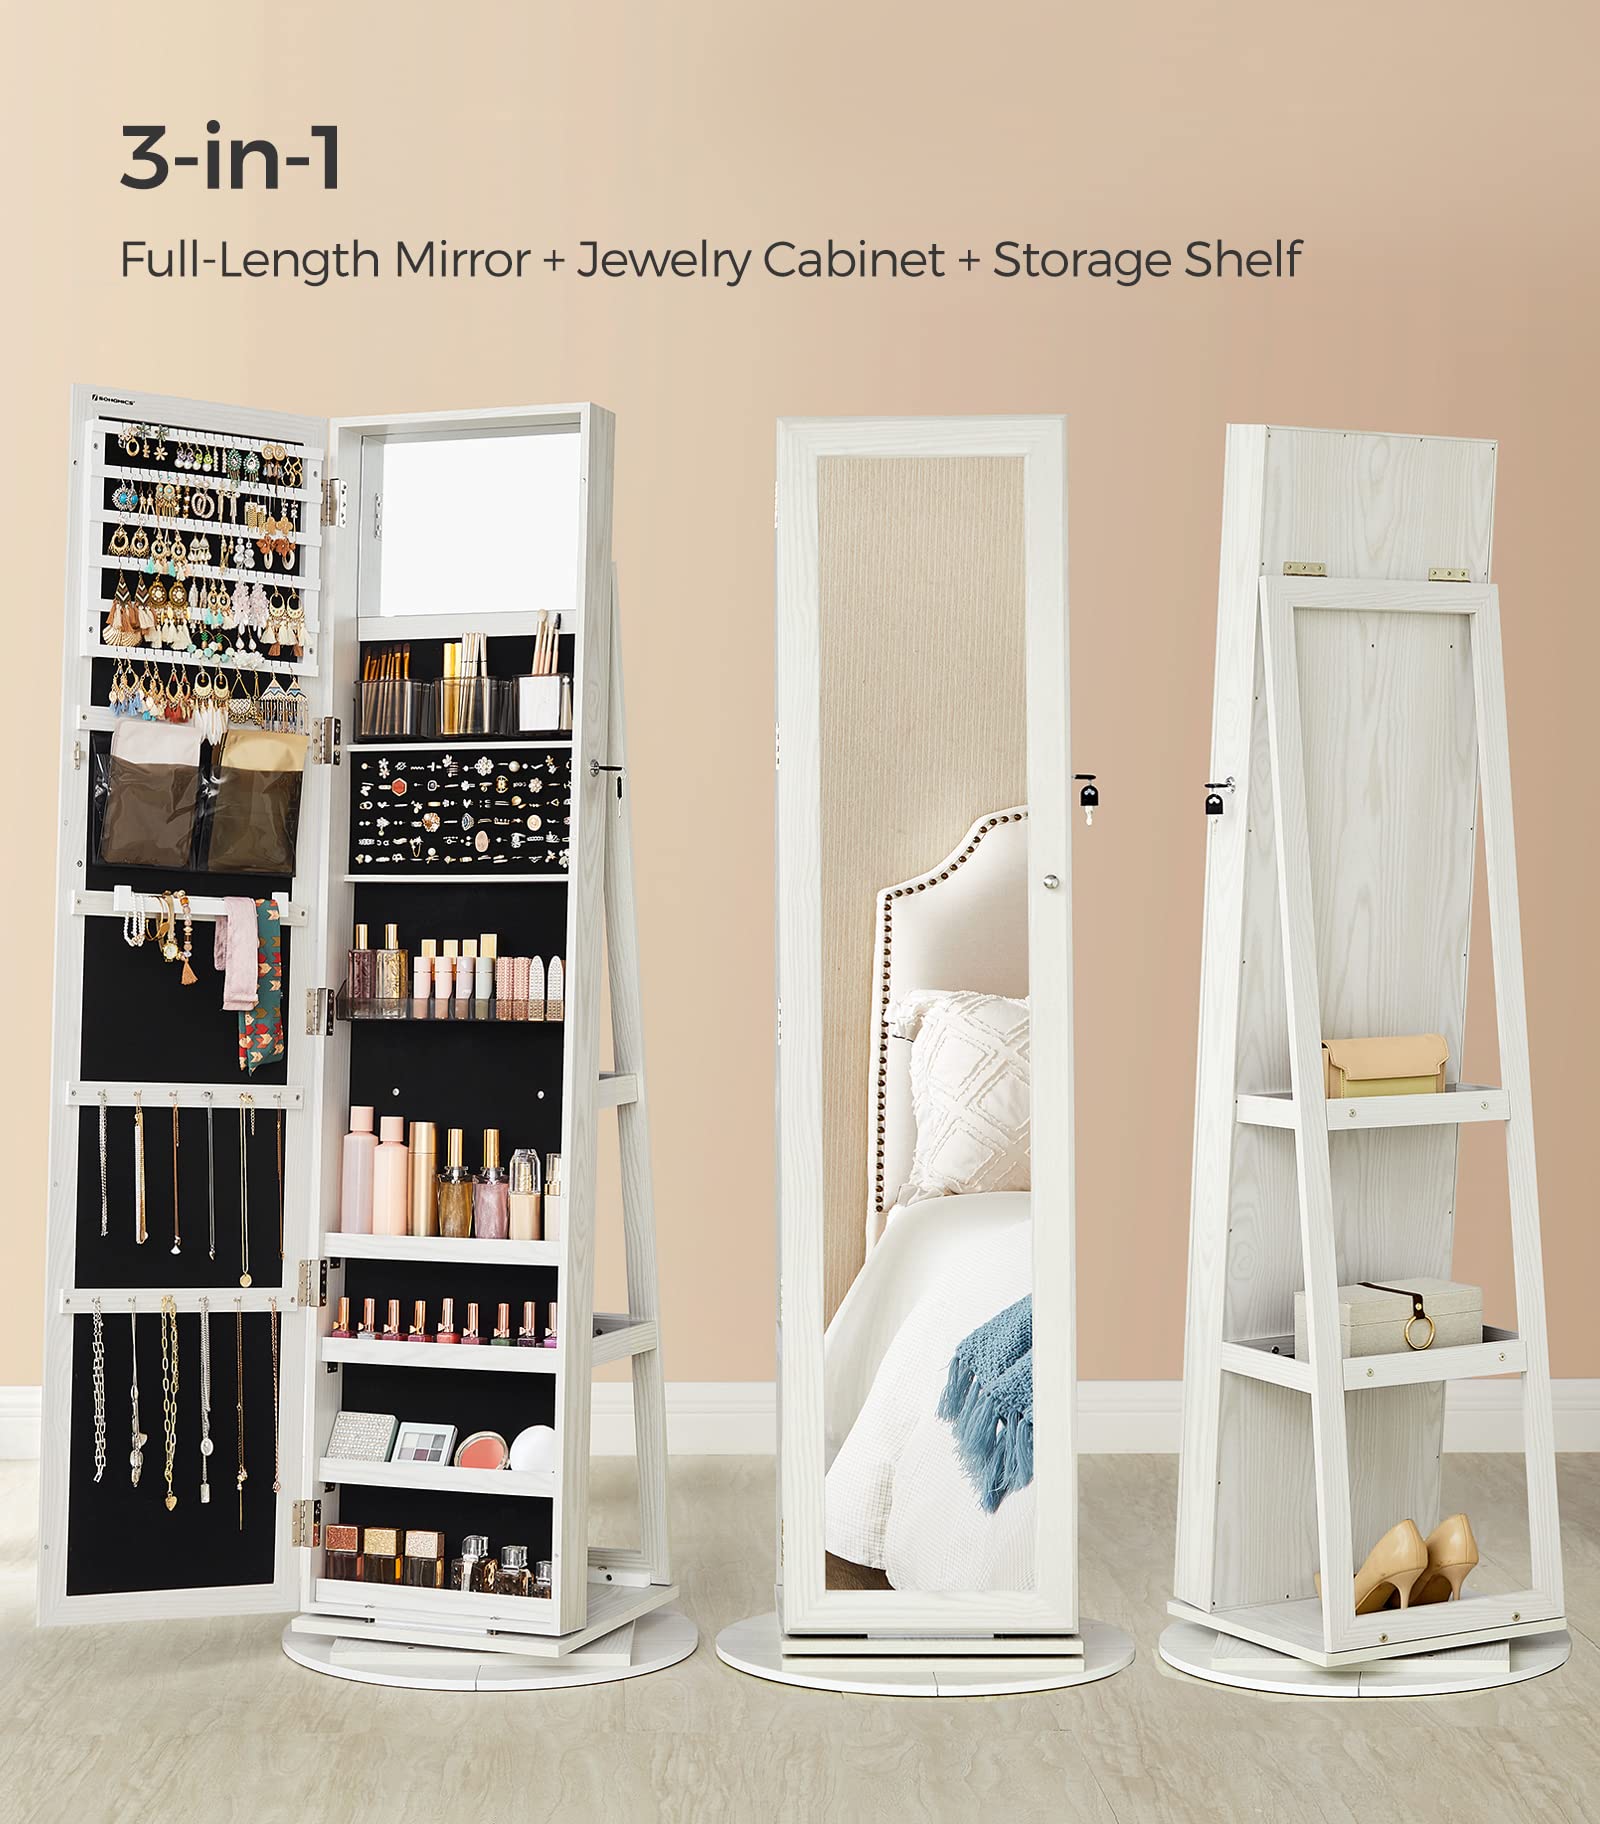 SONGMICS 360° Swivel Jewelry Cabinet, Lockable Organizer with Full-Length Mirror, Rear Storage Shelves, Built-in Small Armoire, for Women, White UJJC006W01